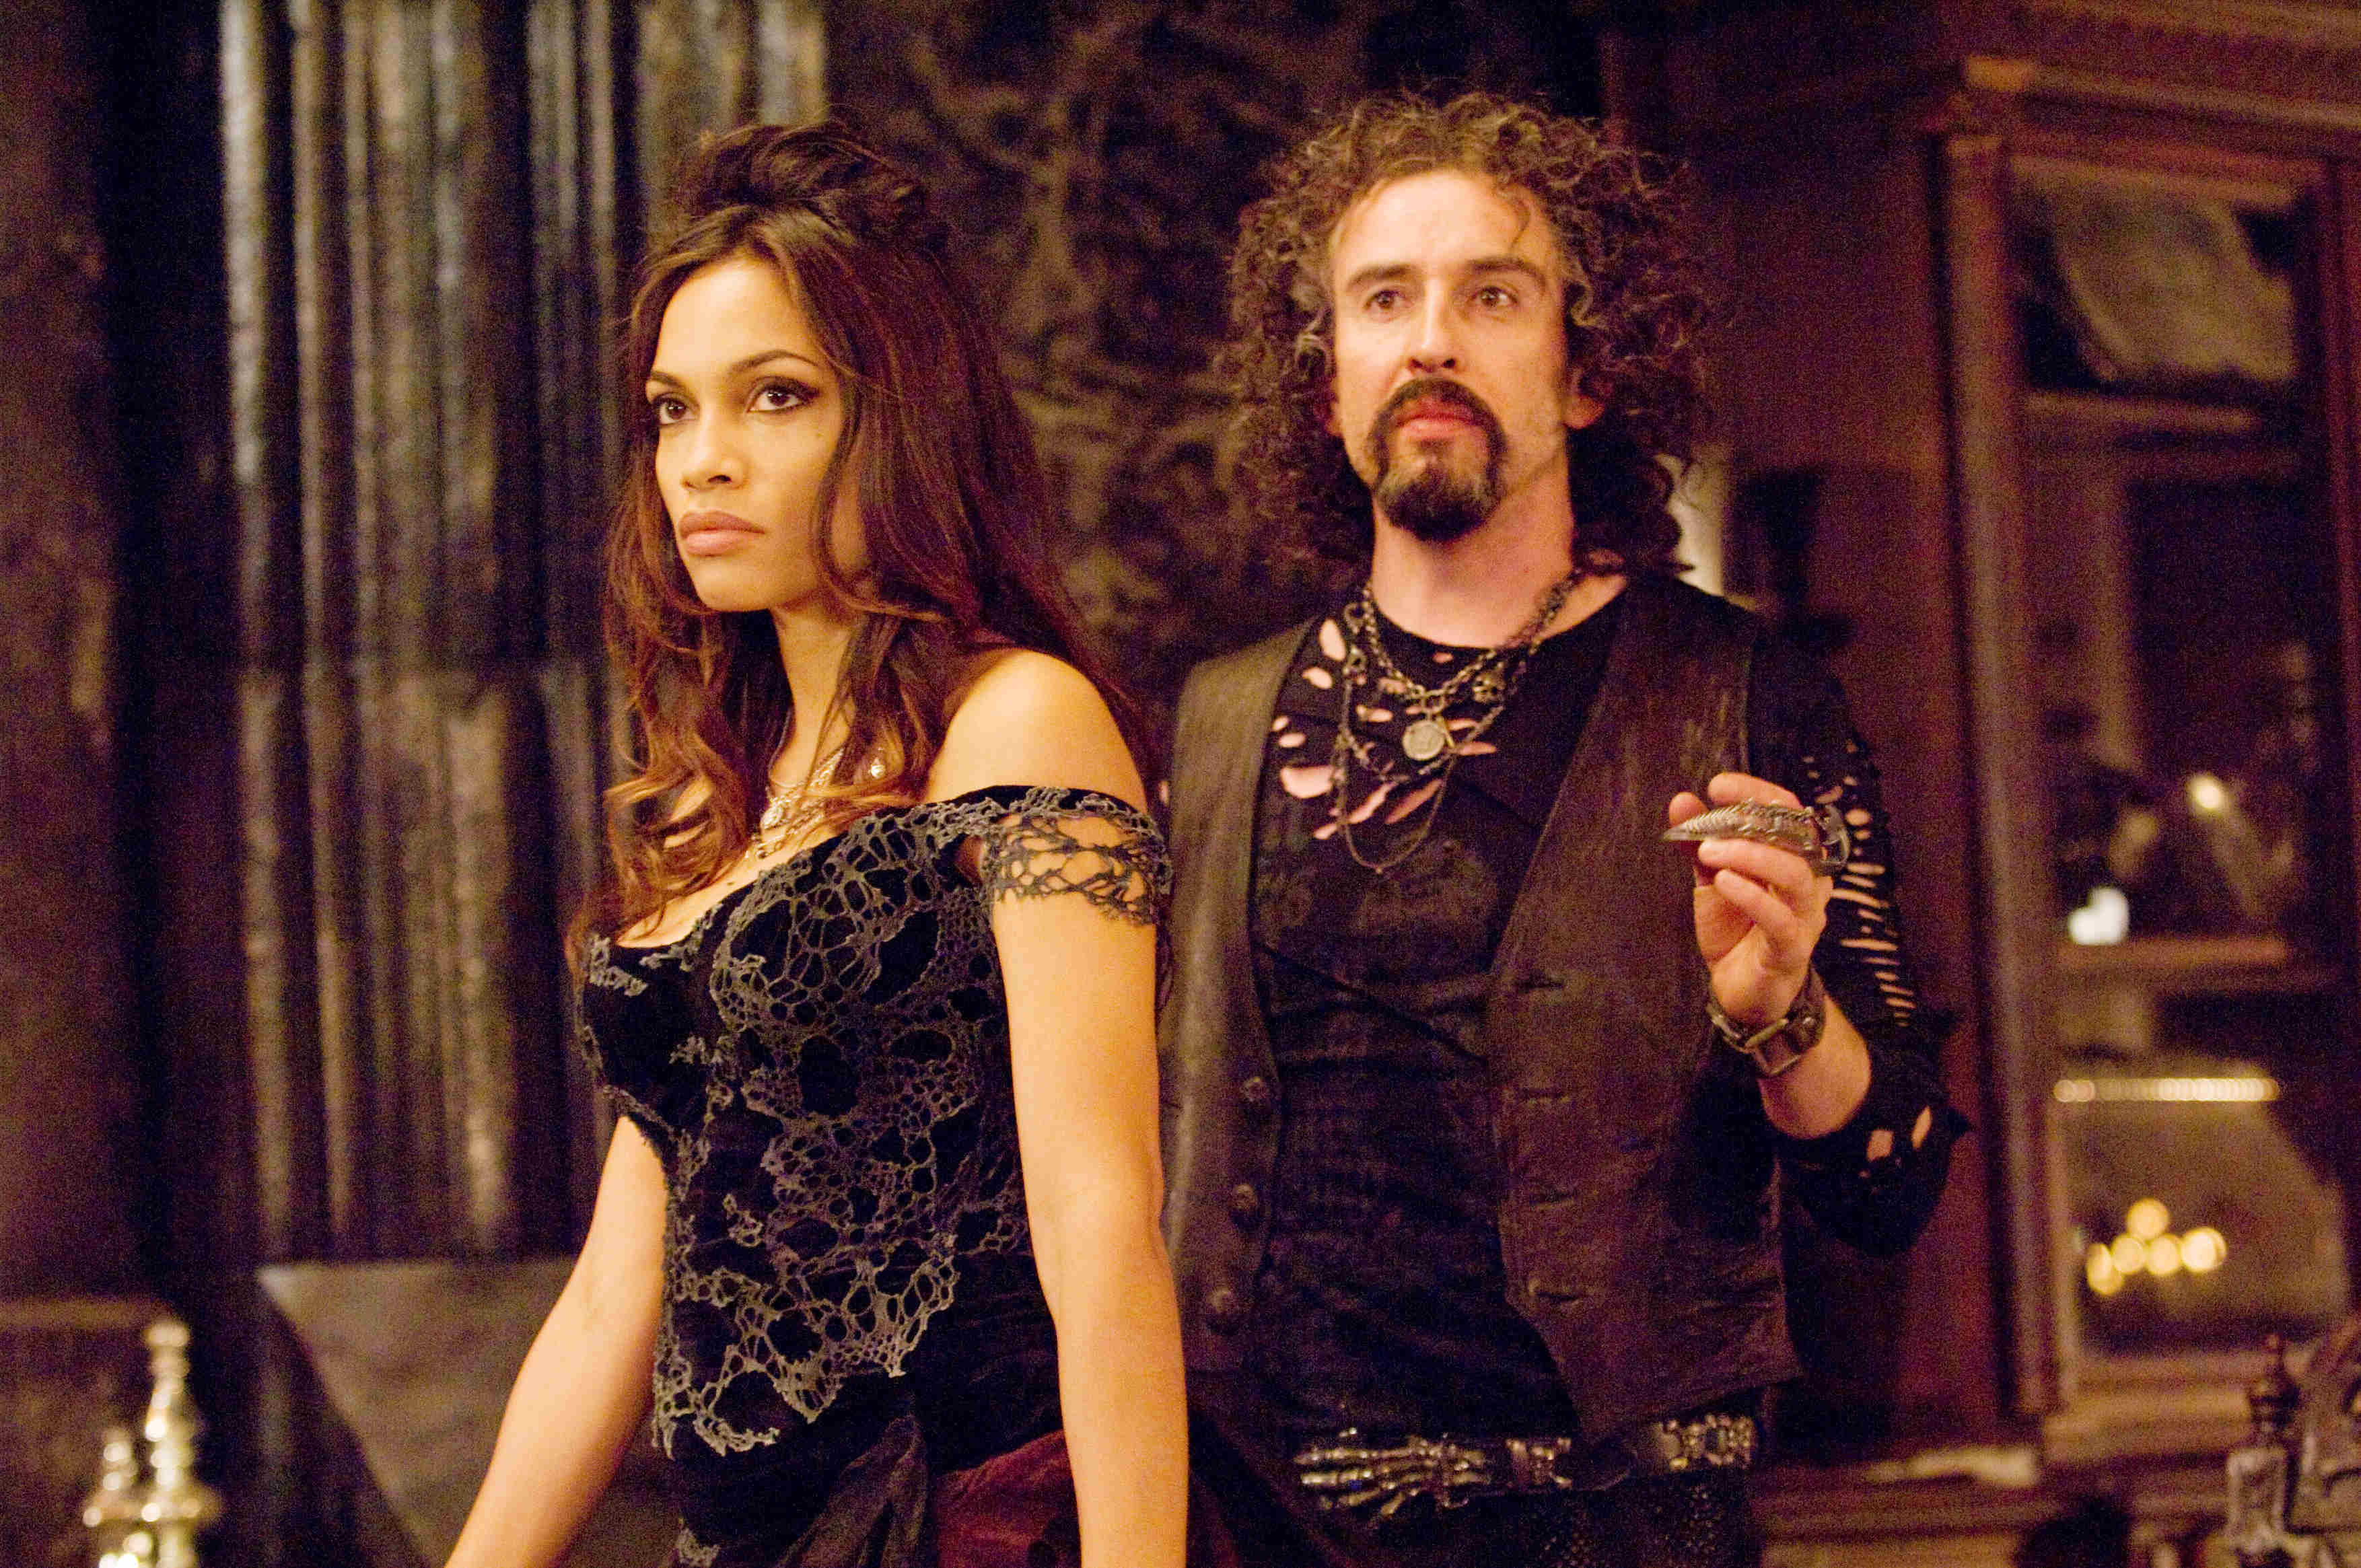 Rosario Dawson stars as Persephone and Steve Coogan stars as Hades in Fox 2000 Pictures' Percy Jackson & the Olympians: The Lightning Thief (2010)